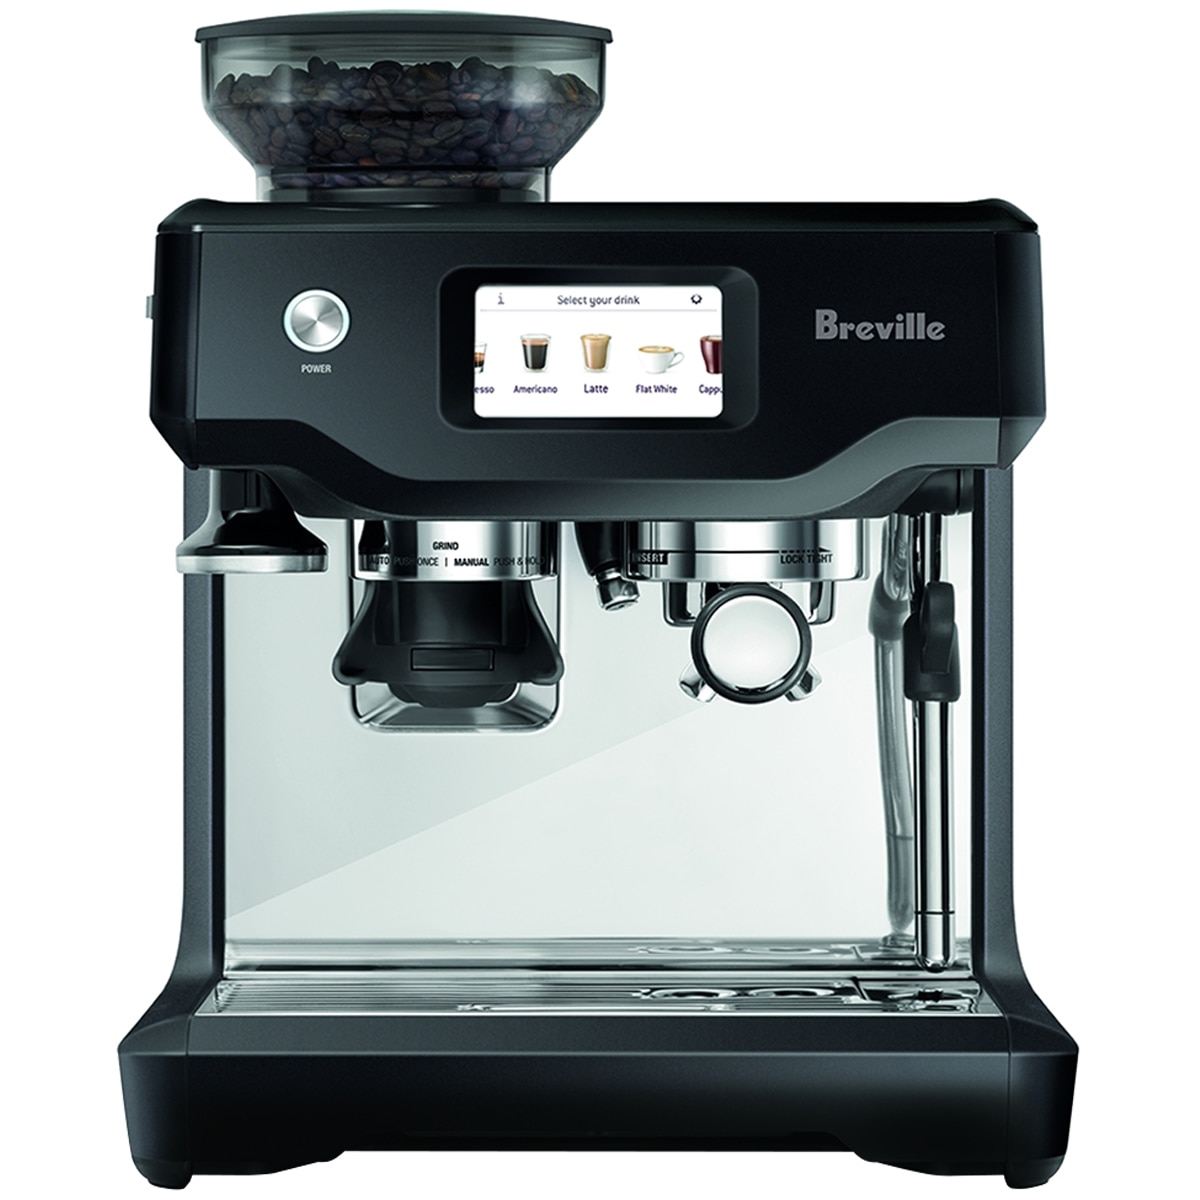 Breville The Barista Touch Auto Coffee Machine BES880BSS - Black